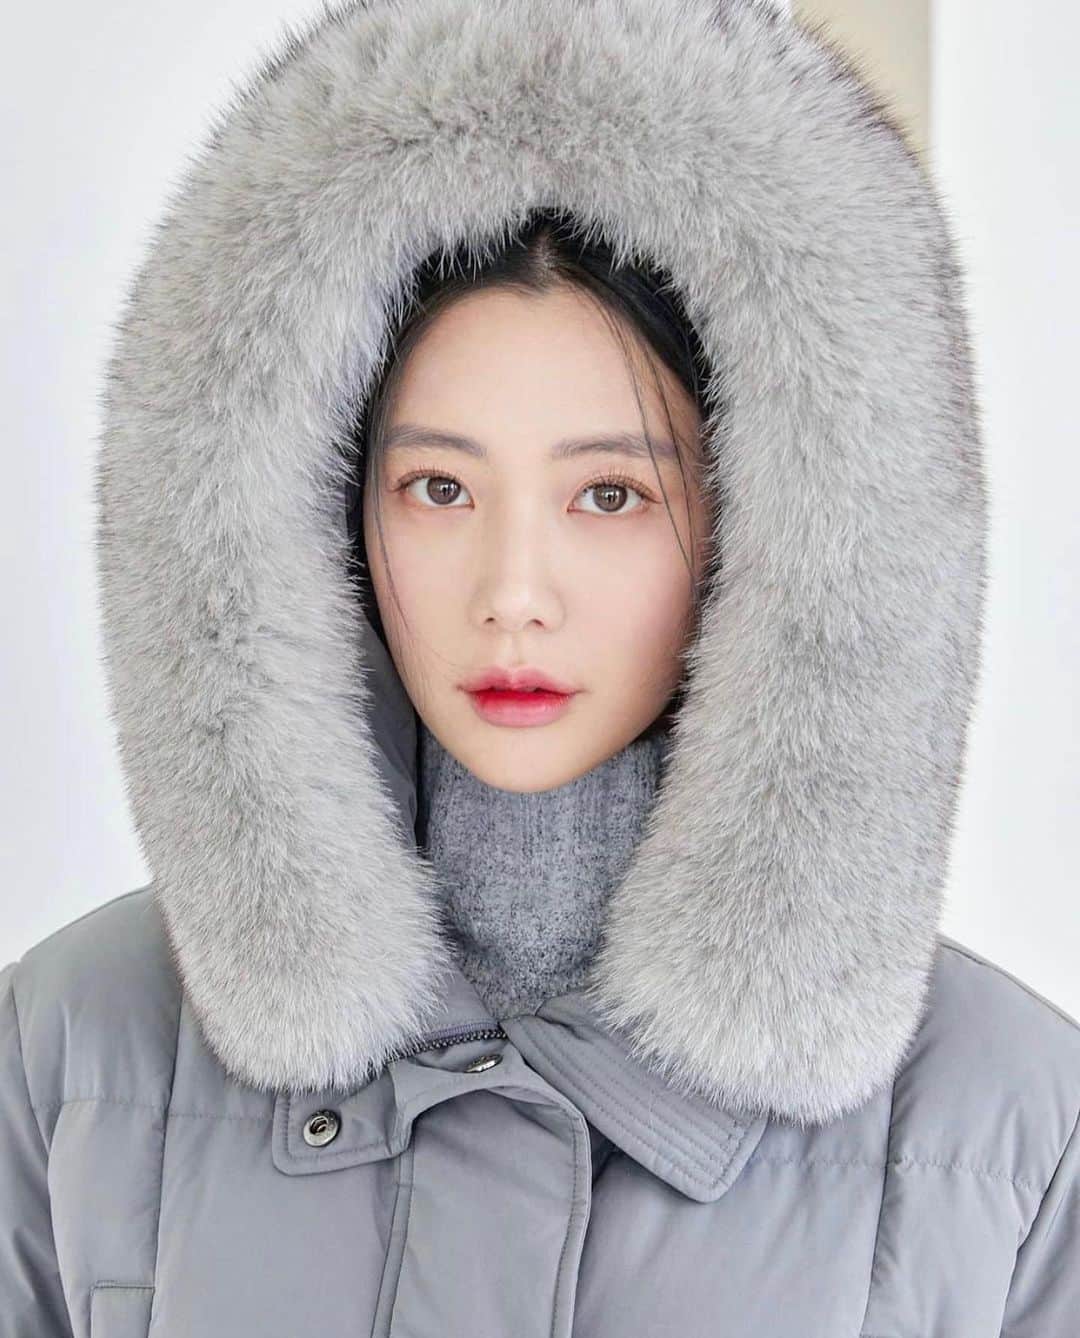 LIECOLLECTIONのインスタグラム：「The Warmest Colab is Back! LIE x Clara x Hyundai Limited Edition Down Coat Available Now - DM for More Details .⠀⠀⠀⠀⠀⠀⠀⠀⠀⠀⠀⠀⠀⠀⠀⠀⠀⠀ .⠀⠀⠀⠀⠀⠀⠀⠀⠀⠀⠀⠀⠀⠀⠀⠀⠀⠀ .⠀⠀⠀⠀⠀⠀⠀⠀⠀⠀⠀⠀⠀⠀⠀⠀⠀⠀ .⠀⠀⠀⠀⠀⠀⠀⠀⠀⠀⠀⠀⠀⠀⠀⠀⠀⠀ .⠀⠀⠀⠀⠀⠀⠀⠀⠀⠀⠀⠀⠀⠀⠀⠀⠀⠀ .⠀⠀⠀⠀⠀⠀⠀⠀⠀⠀⠀⠀⠀⠀⠀⠀⠀⠀ .⠀⠀⠀⠀⠀⠀⠀⠀⠀⠀⠀⠀⠀⠀⠀⠀⠀⠀ #liecollection #이청청 #clara #limitededition #collaboration #wintercoat #hyundaidepartmentstore #downjacket #shopnow #newarrivals」